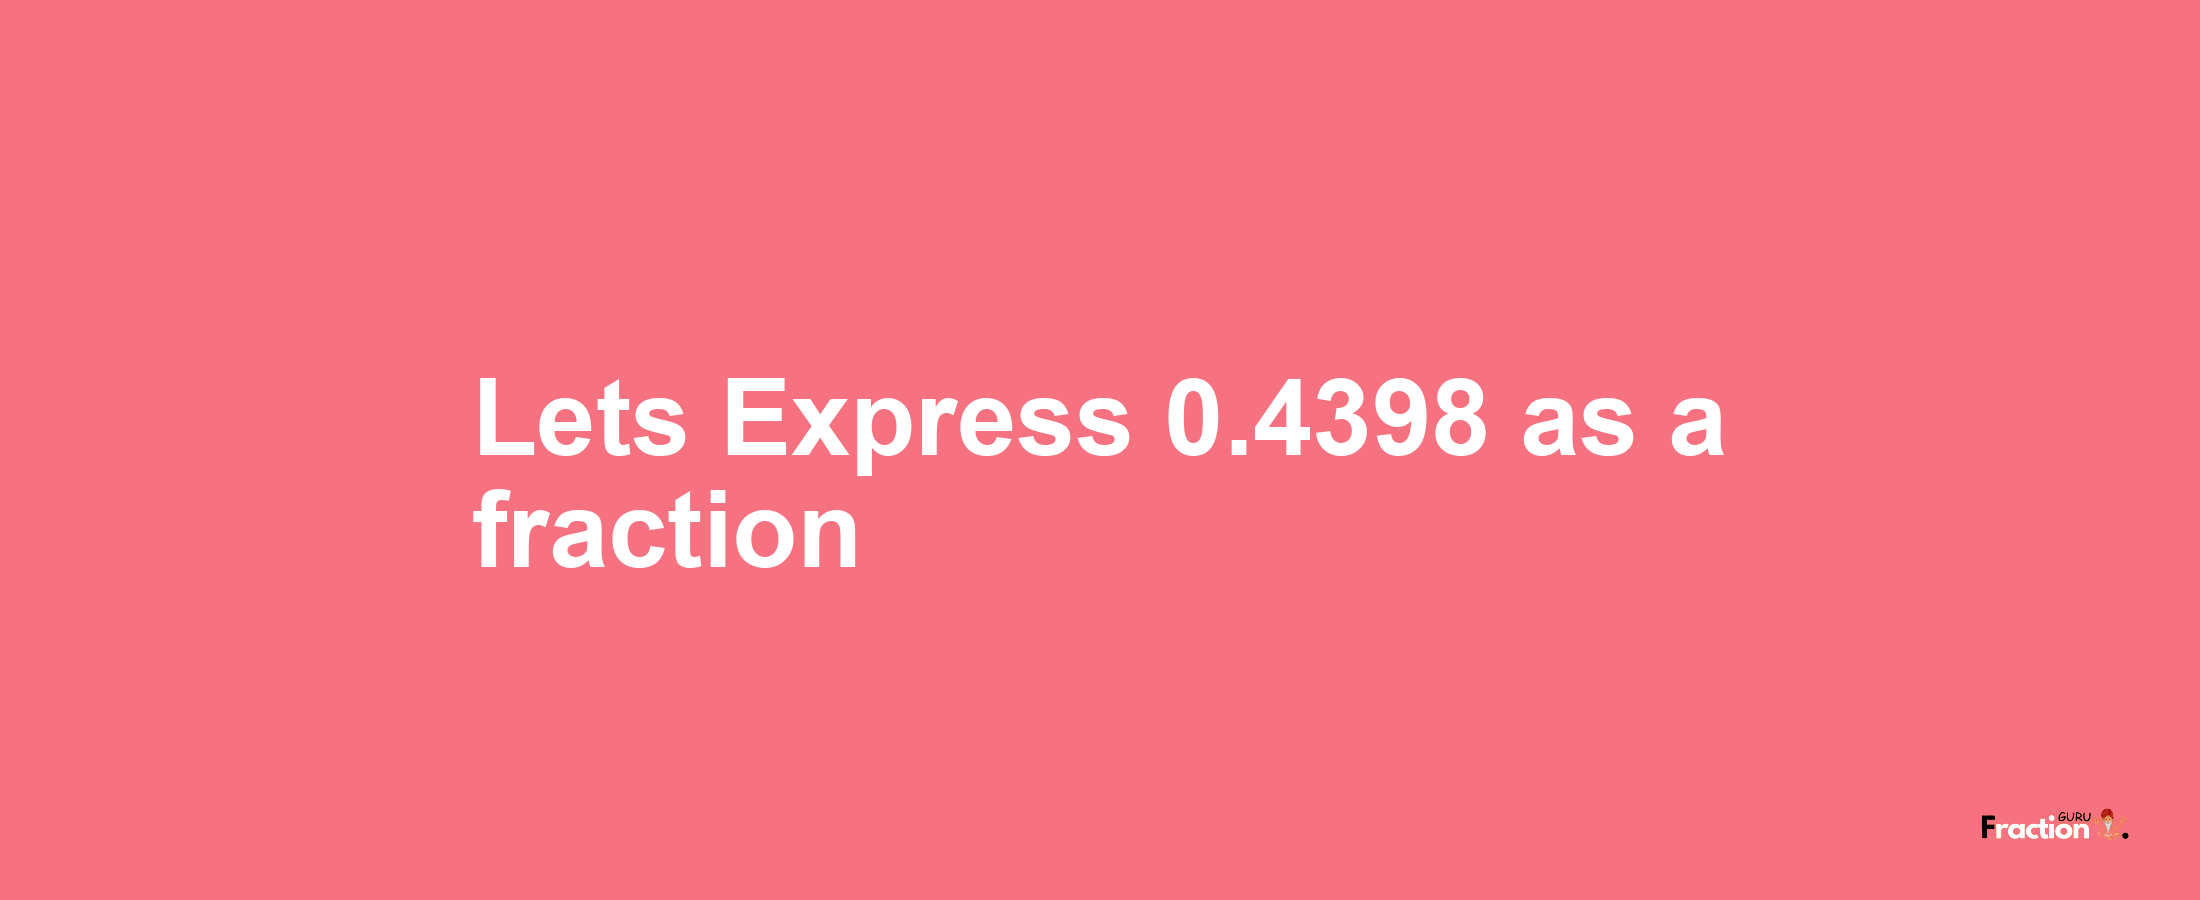 Lets Express 0.4398 as afraction